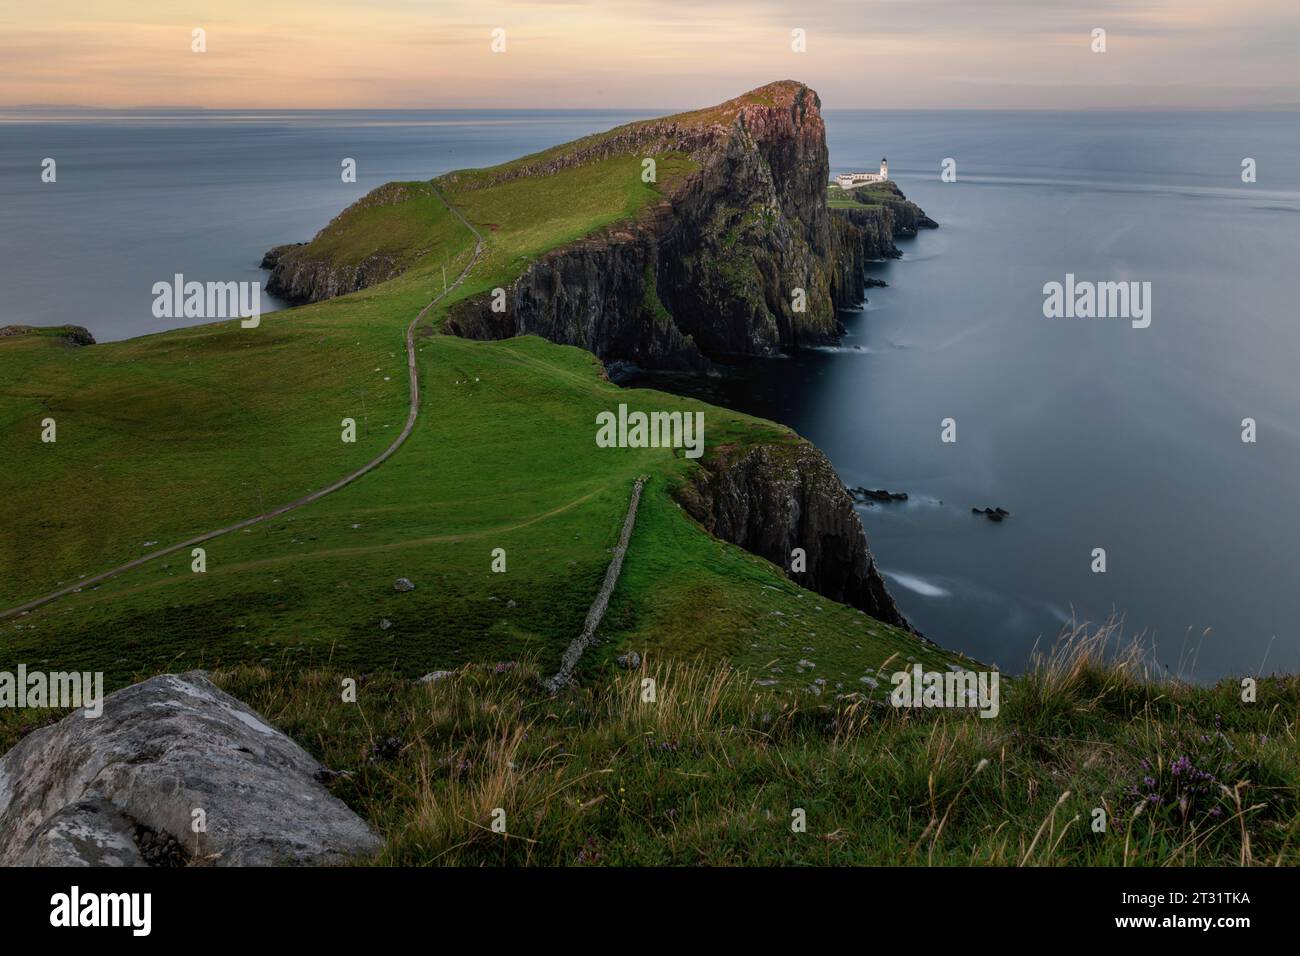 Neist Point is a dramatic headland on the Isle of Skye, with towering sea cliffs, dramatic rock formations, and an iconic lighthouse. Stock Photo